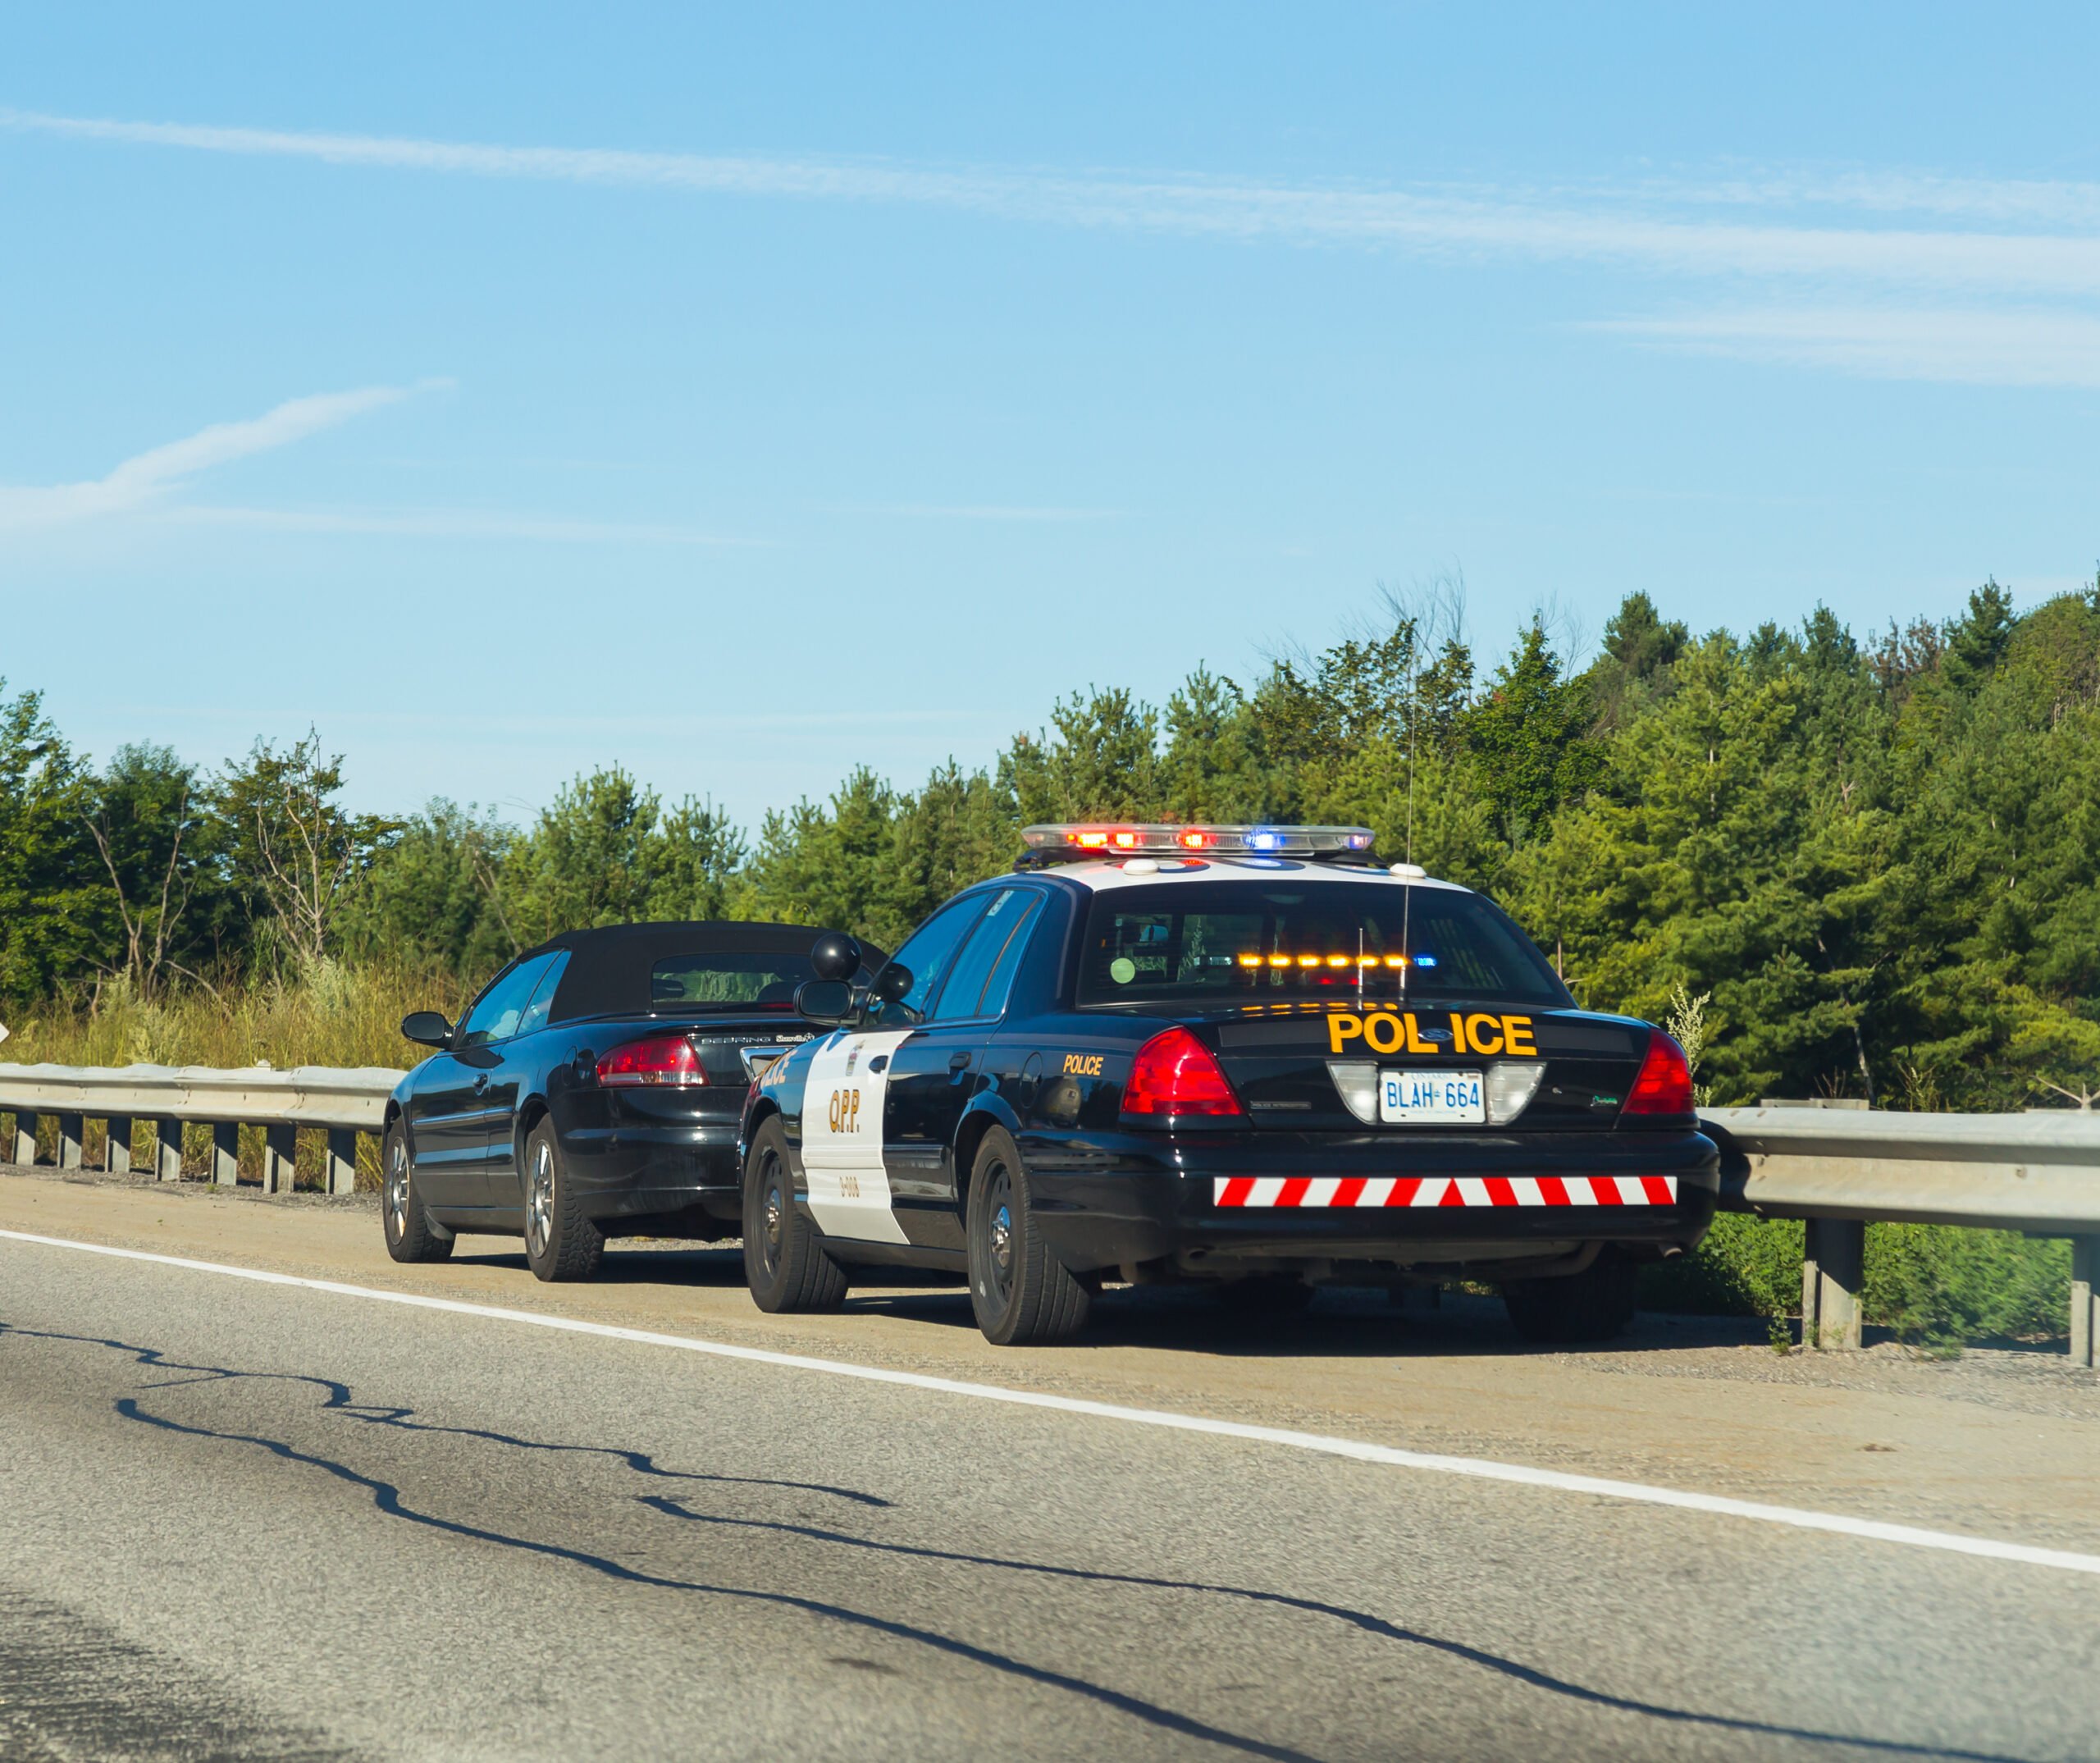 OPP car pulled over to the side of the road with a driver in their vehicle parked in front - driving record of 9